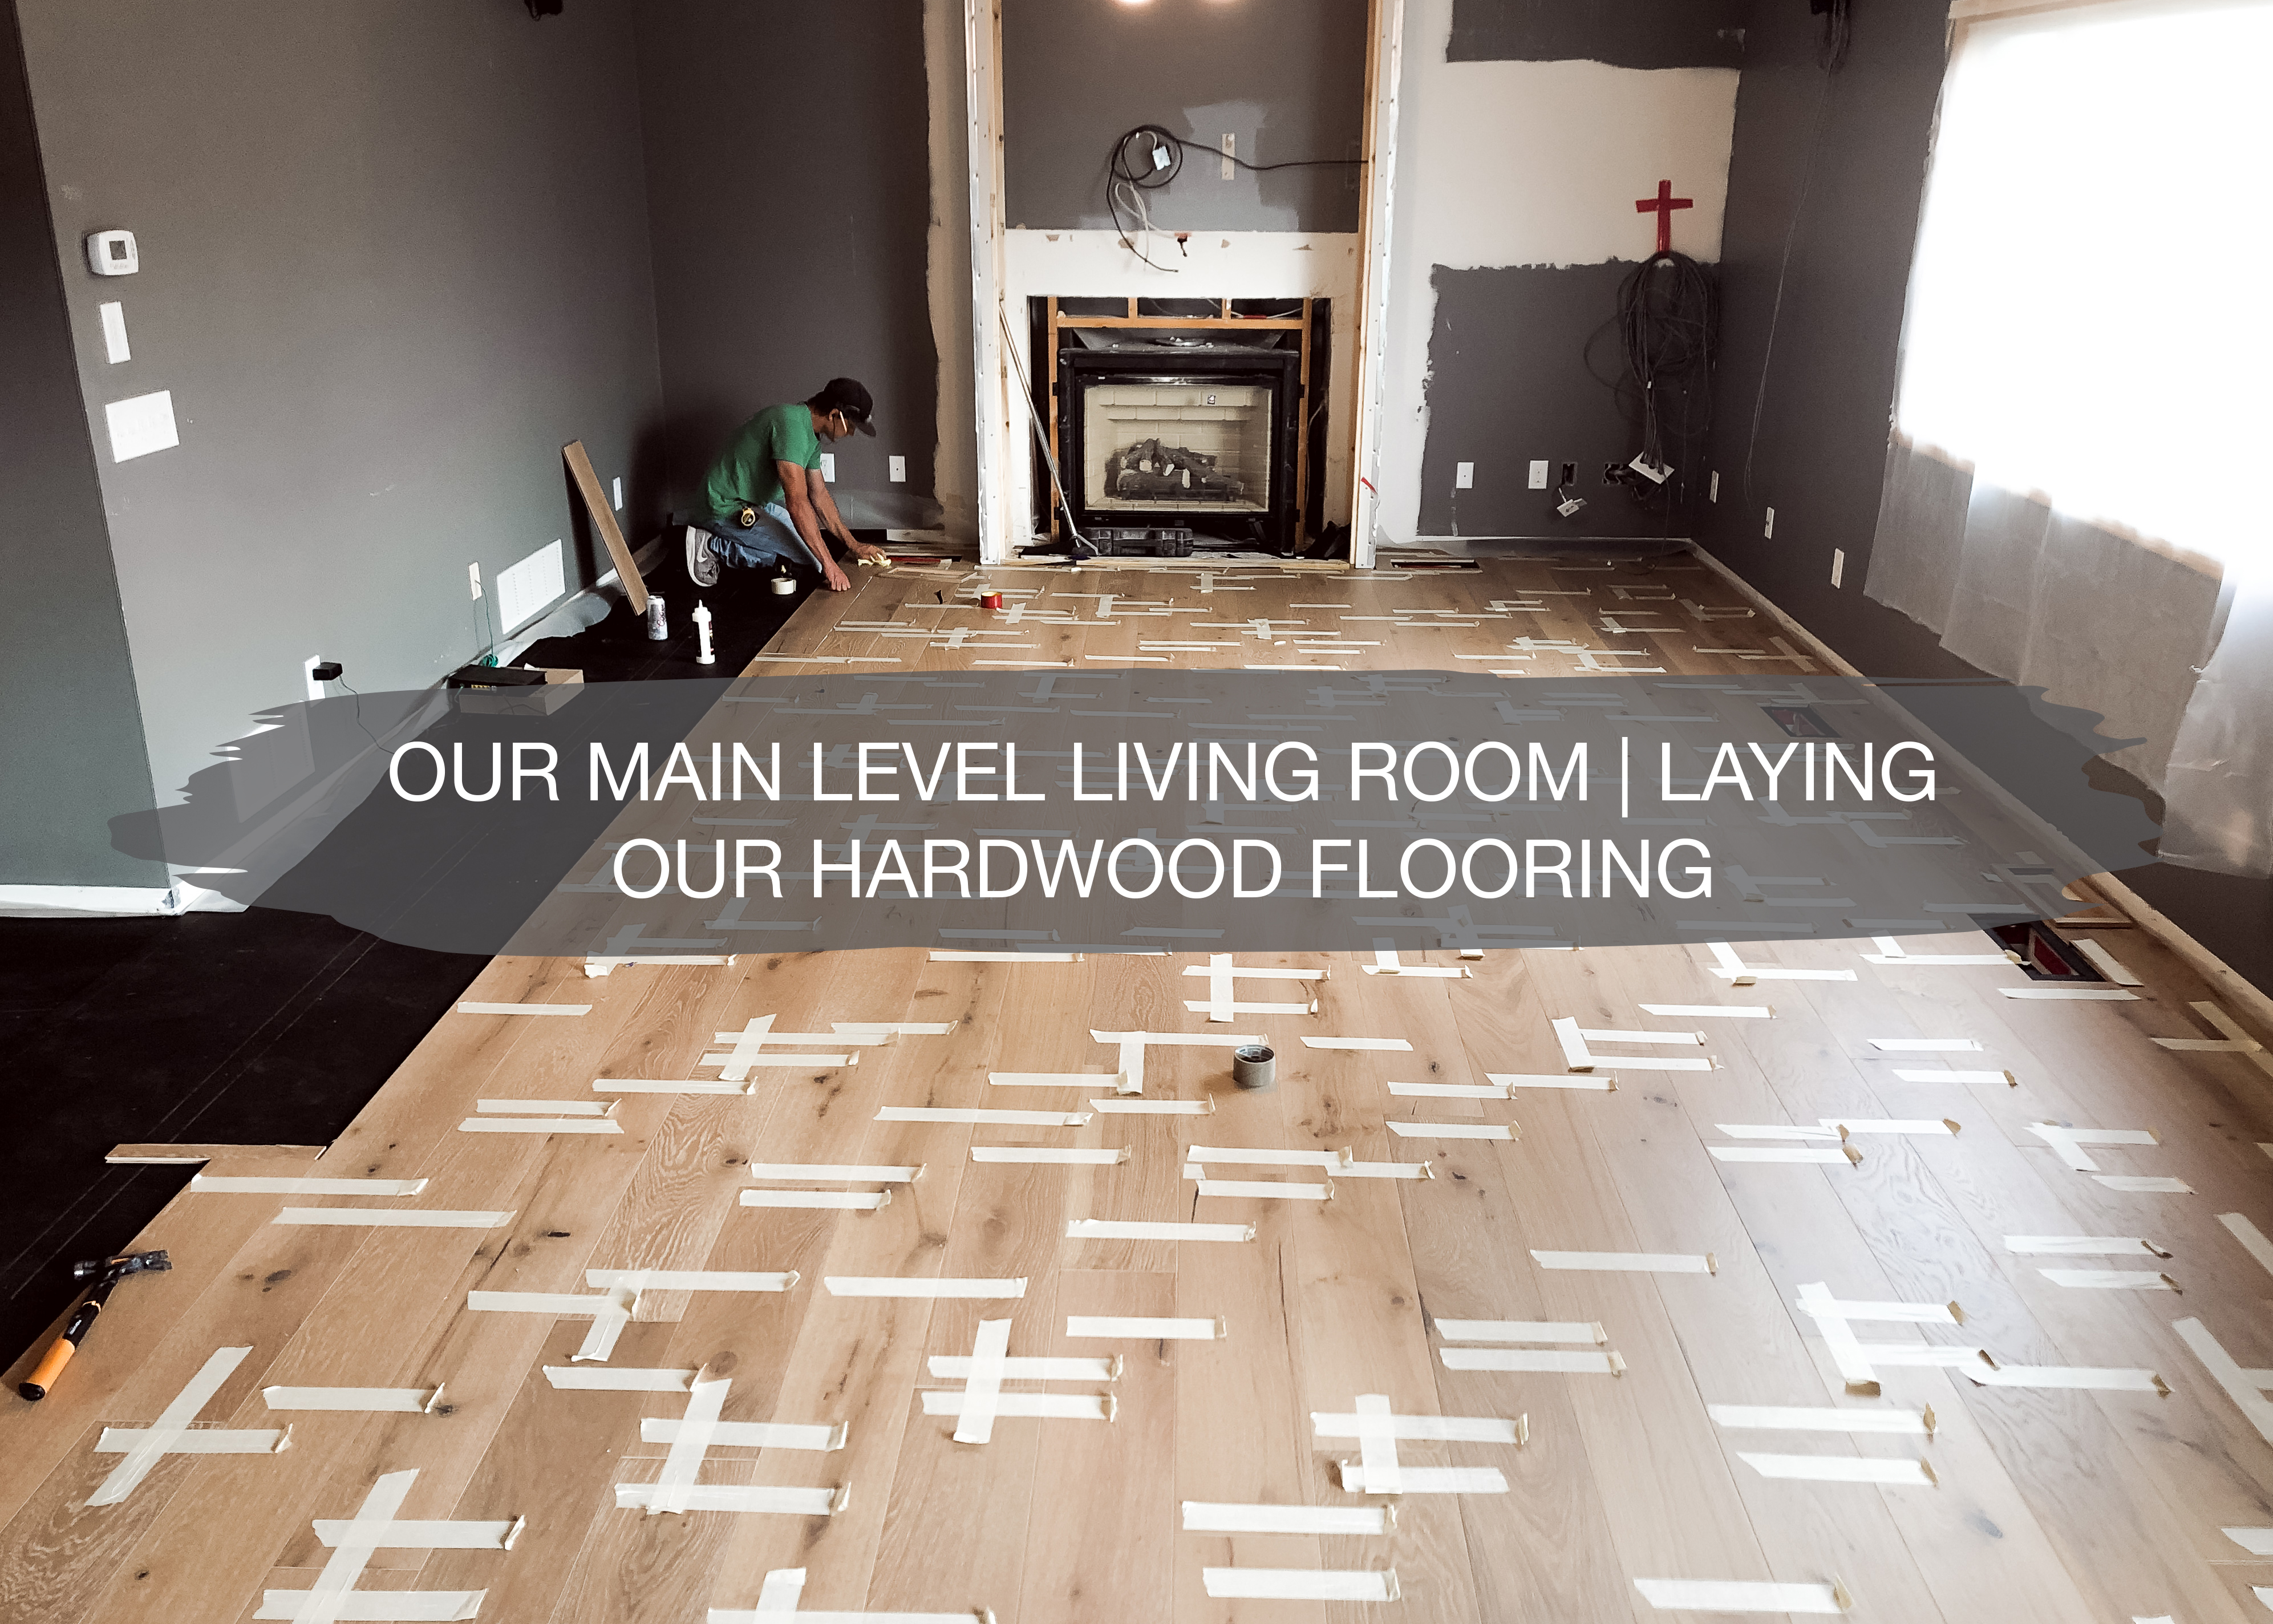 Our Main Level Living Room | Laying our Hardwood Flooring 1